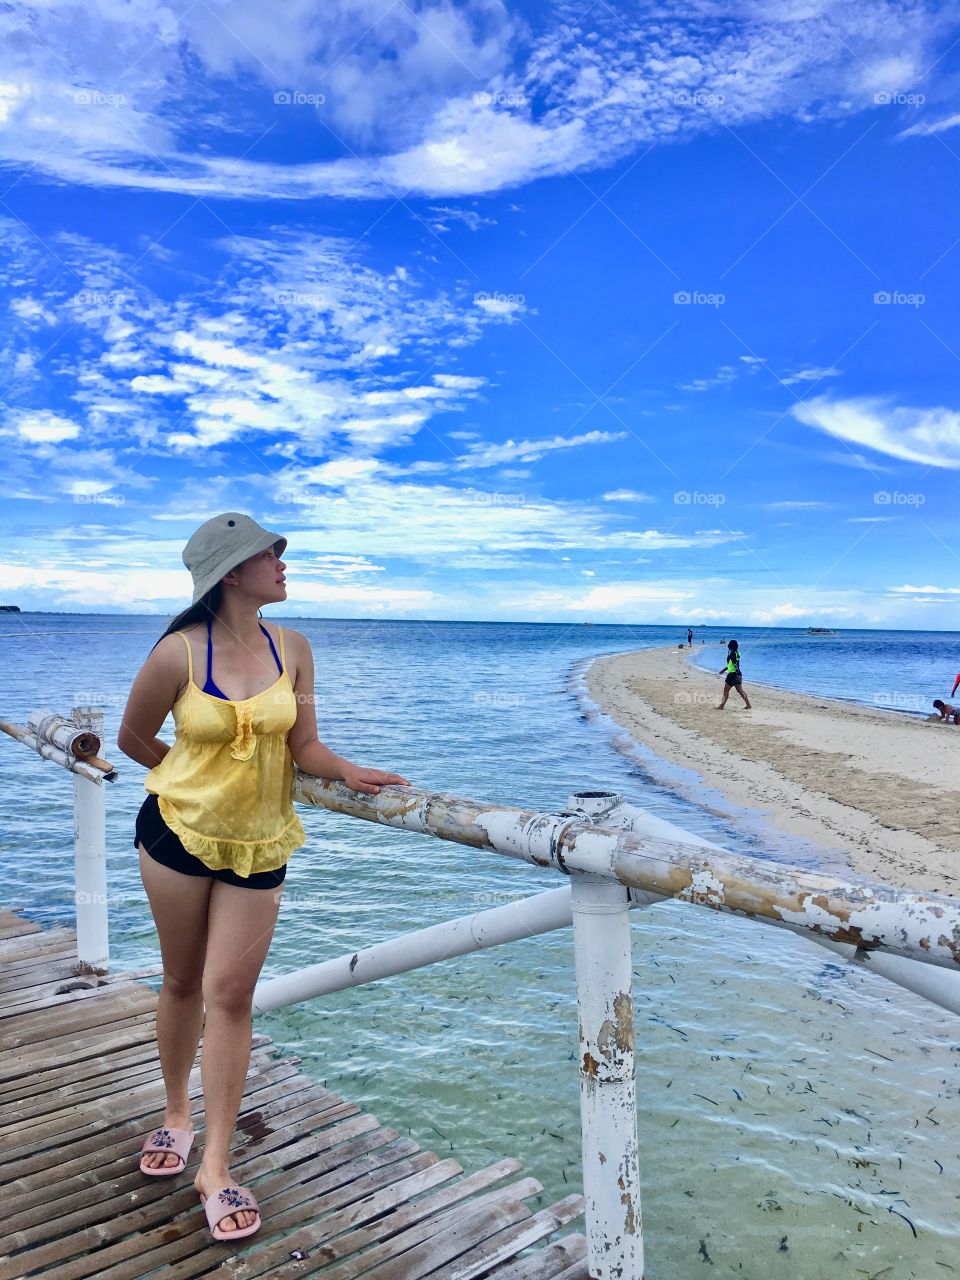 One reason to visit Philippines because of the breathtaking views of the beaches here. Endure yourself with the powdery sand, the crystal clear water of the beaches and the fresh circulation of air coming from the wildnerness. Come and check out!